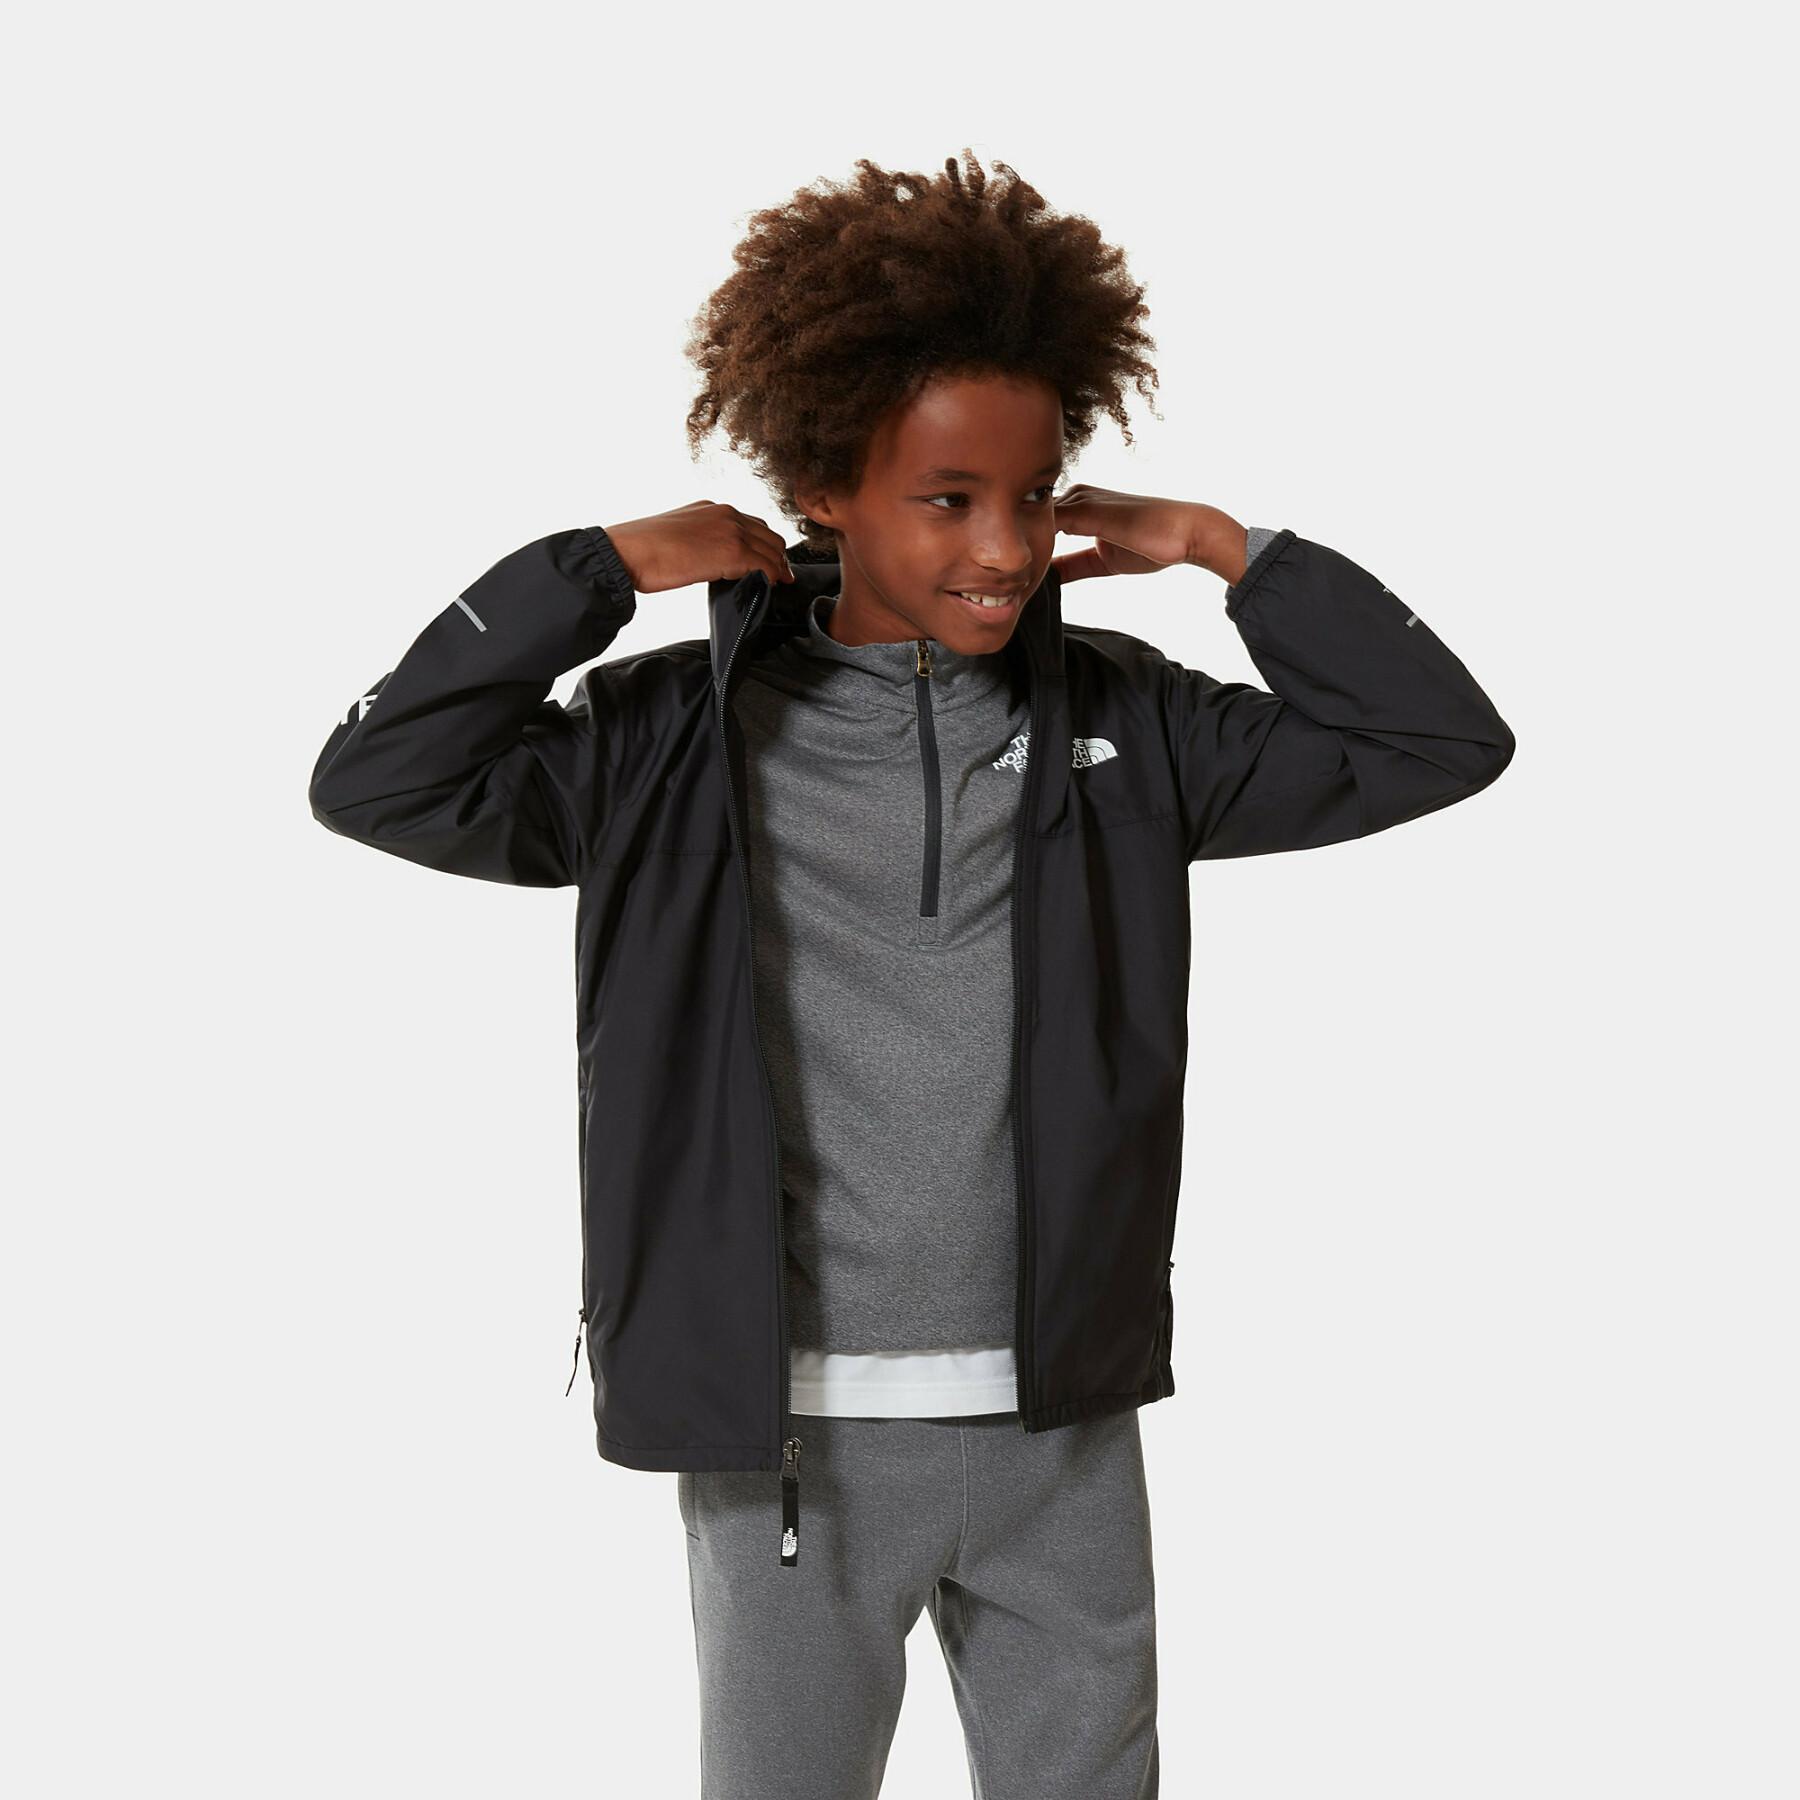 Boy's jacket The North Face Reactor